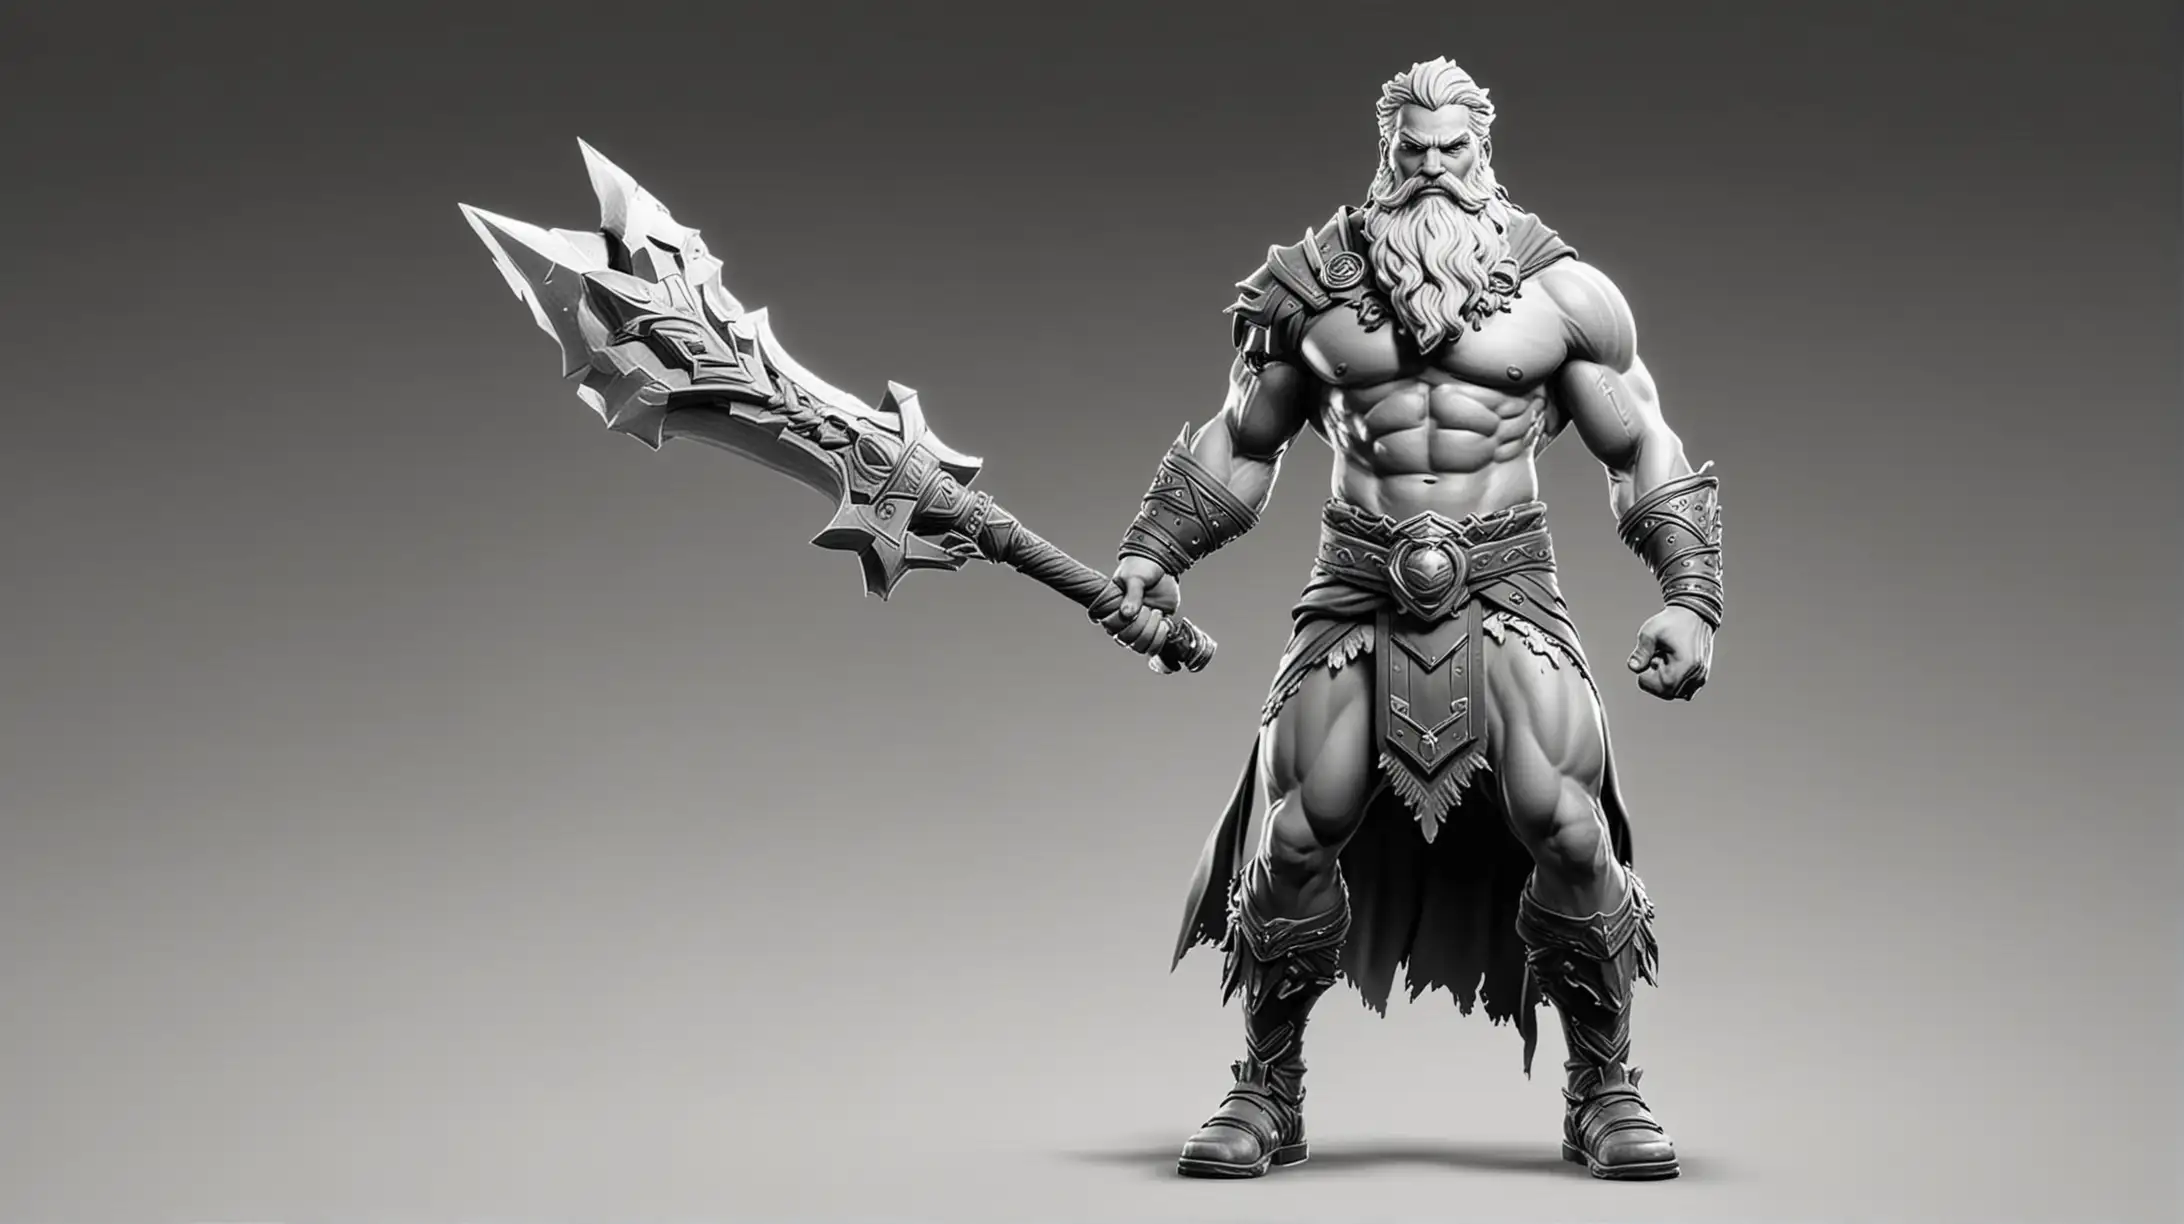 Epic Fortnite Skins Zeus in Battle Stance No Weapon